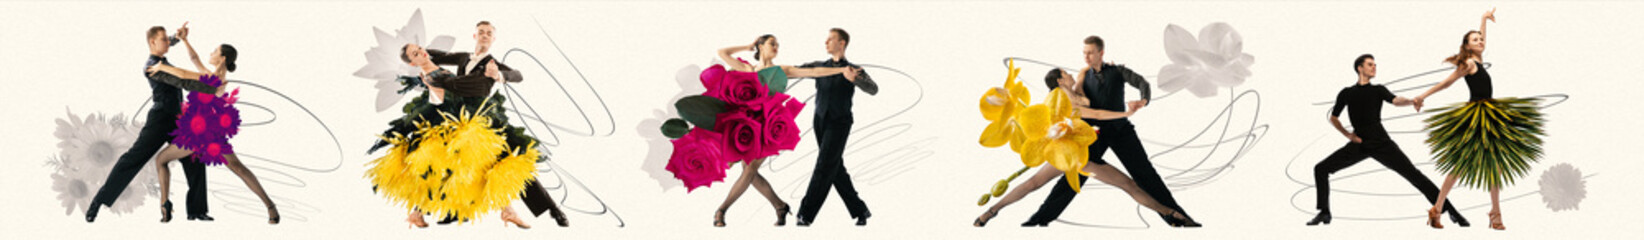 Collage with beautiful couples of ballroom dance dancers in creative floral outfits dancing over...